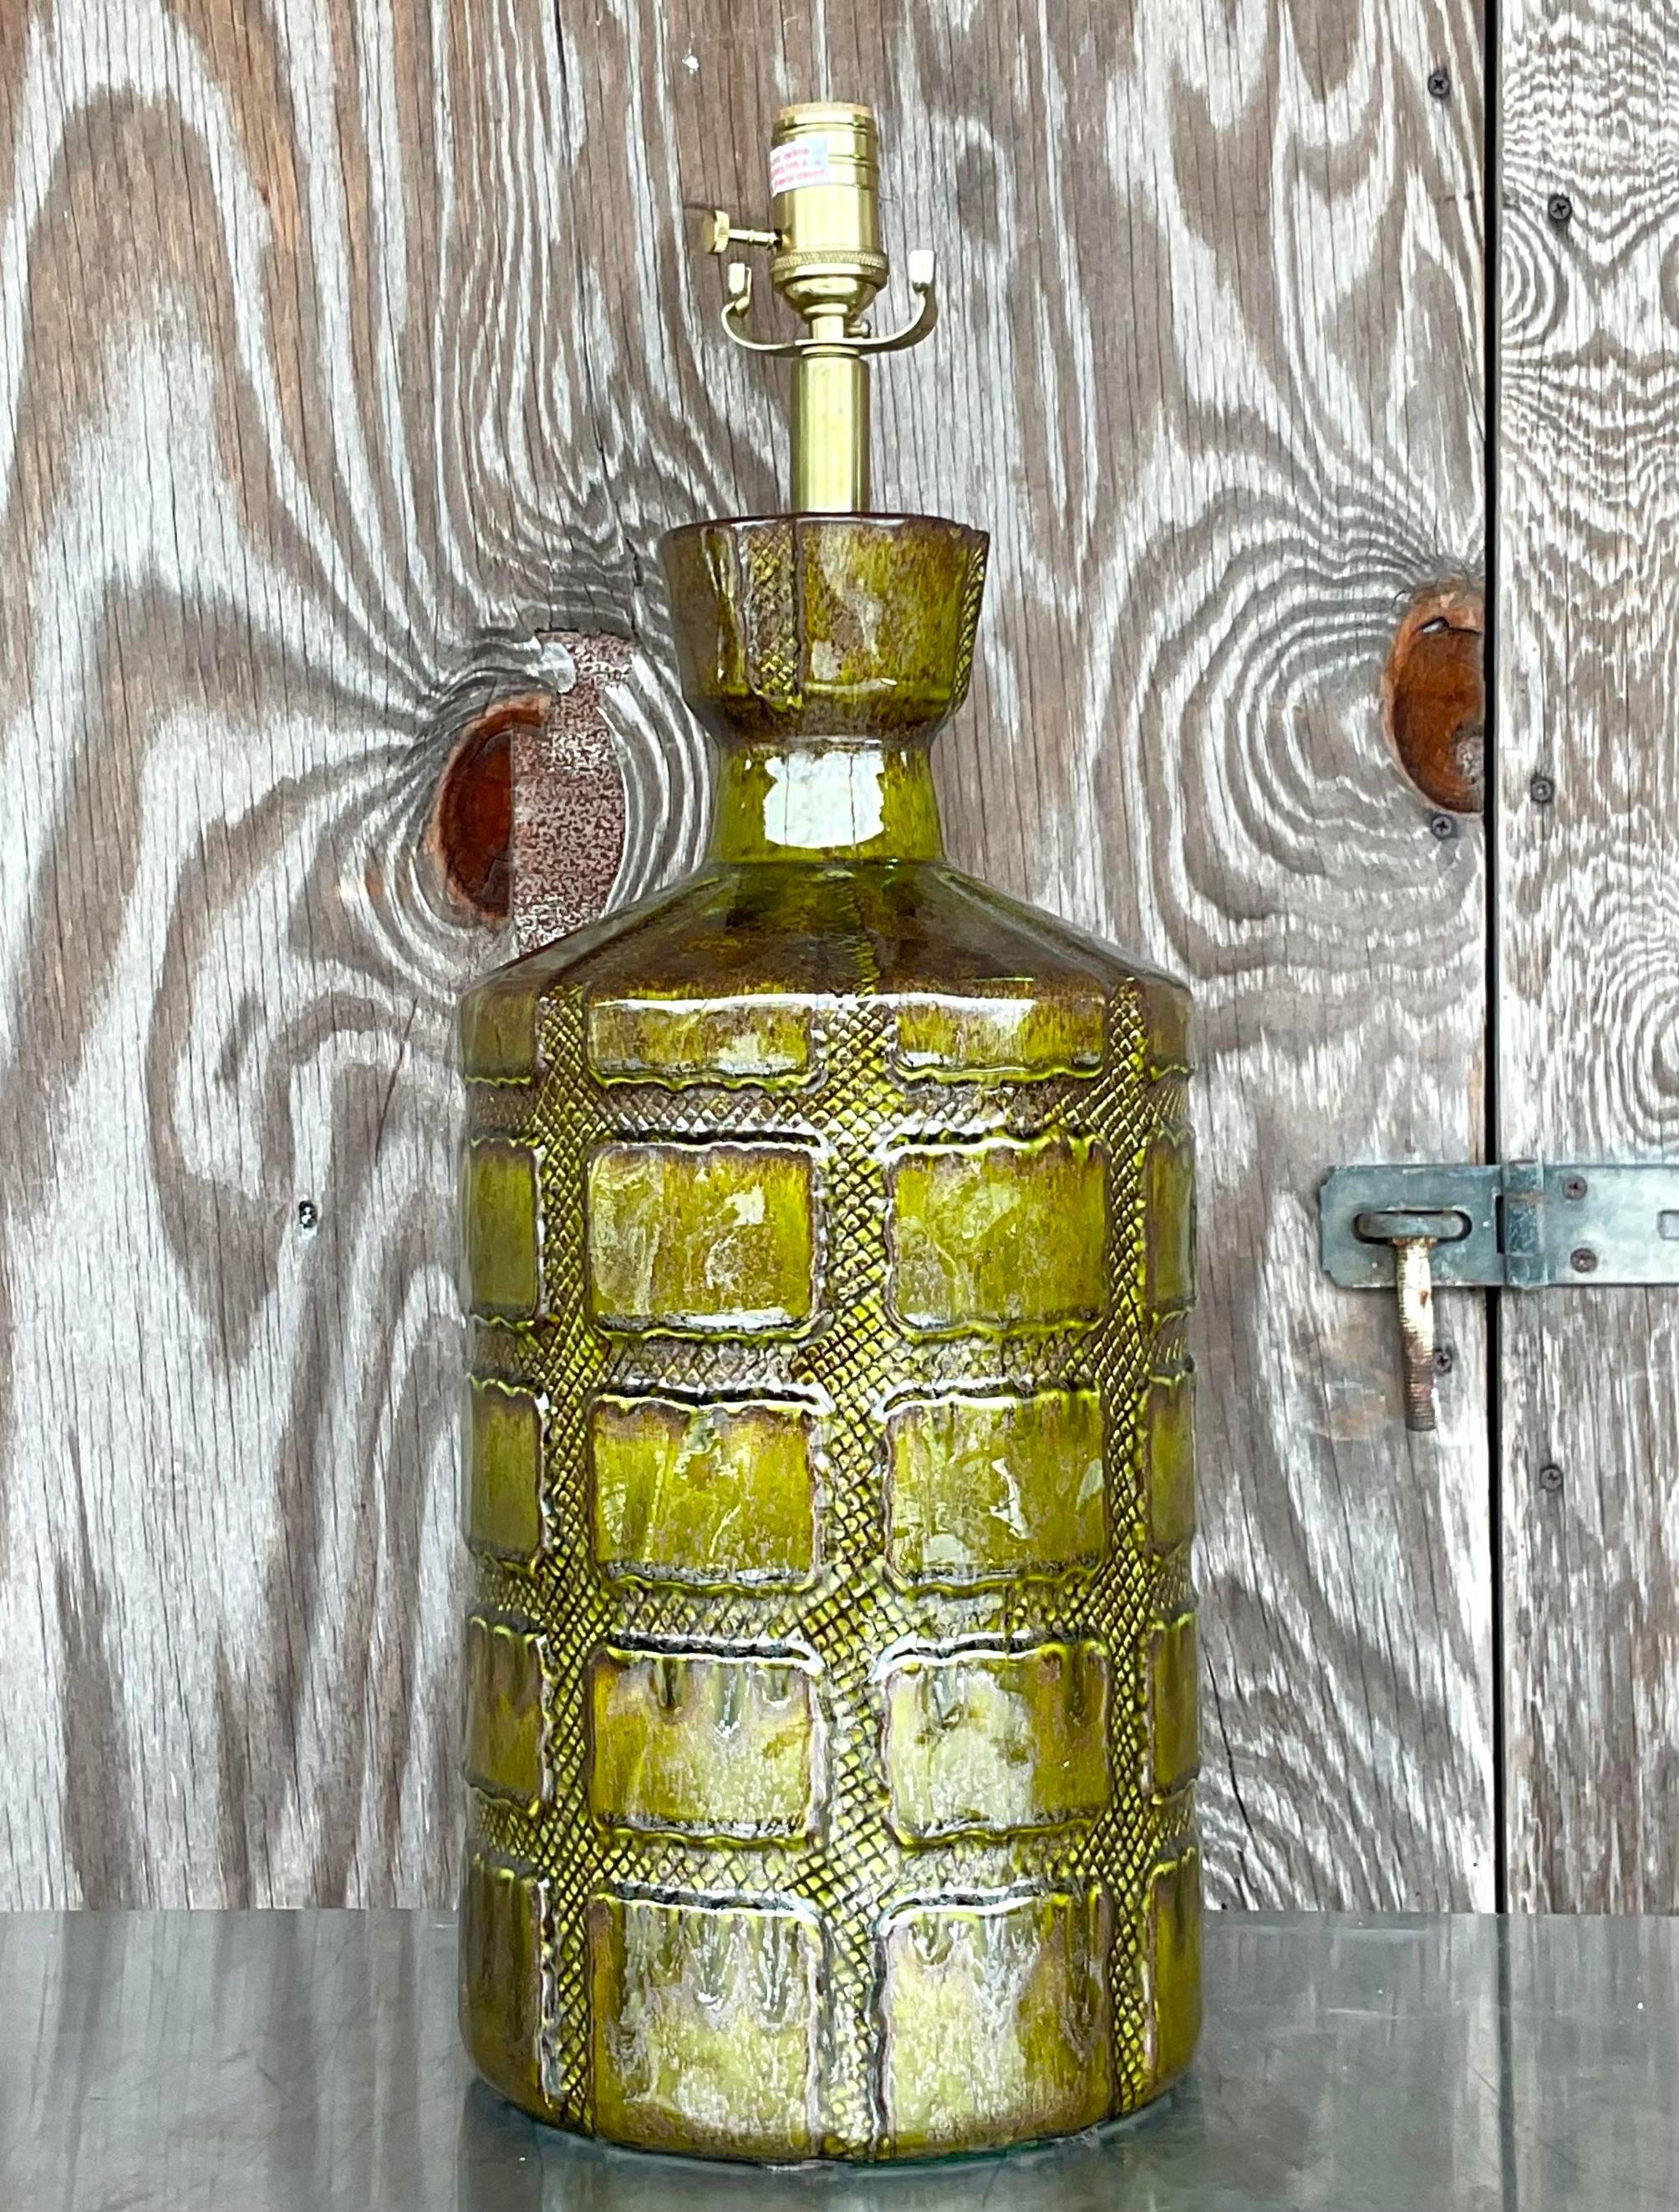 Fabulous vintage MCM table lamp. A chic glazed ceramic finish with a beautiful moss green color. Fully restored with all new hardware and wiring. Acquired from a Palm Beach estate 